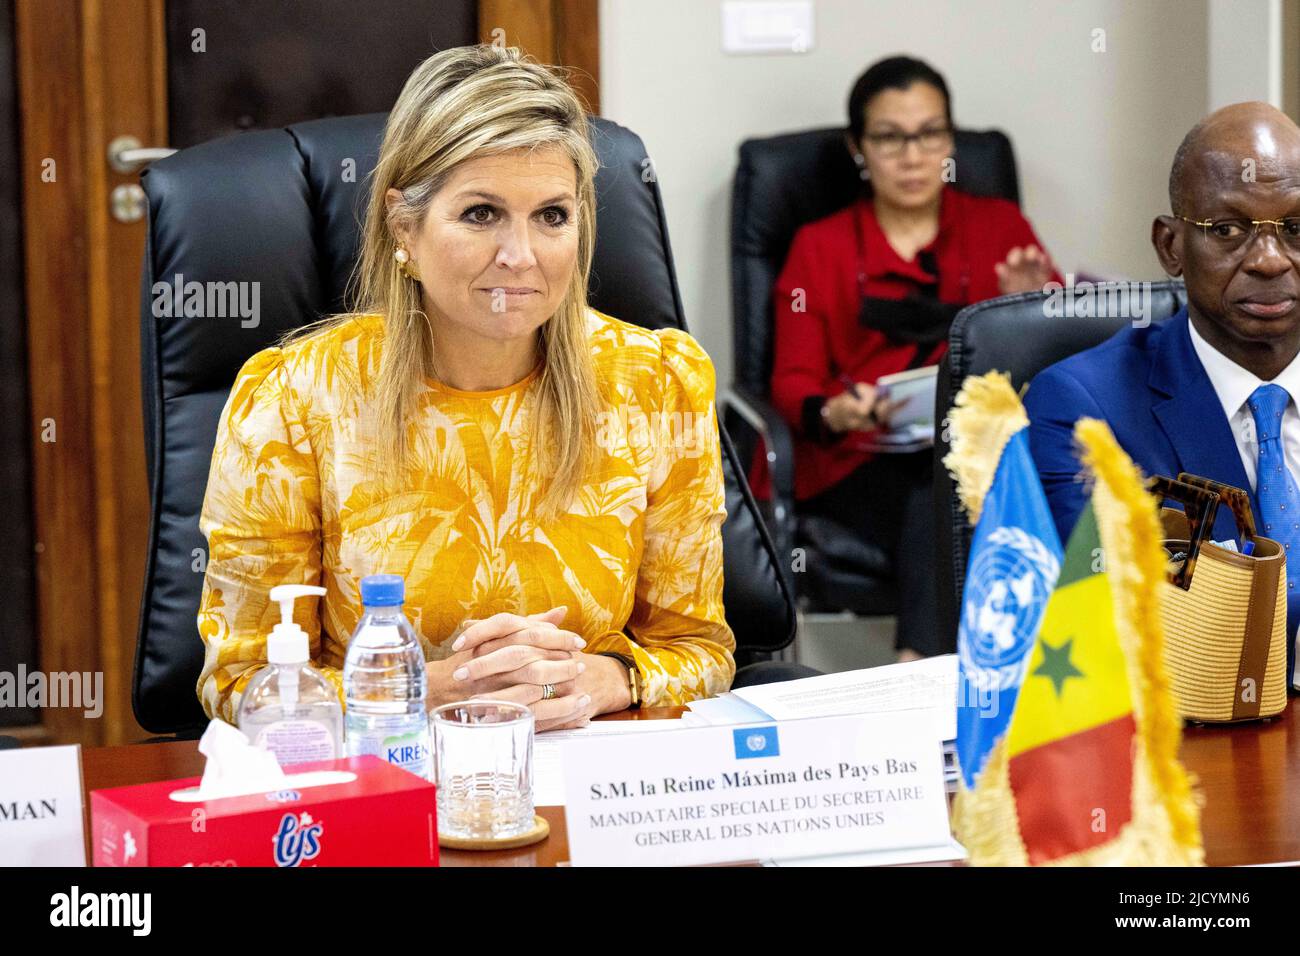 Dakar, Senegal. 16th June, 2022. Queen Maxima of The Netherlands in Dakar,  on June 16, 2022, for meetings with minister Aminata Assome Diatta,  minister Abdoulaye Daouda Diallo, minister Mme. Ndeye Saly Diop